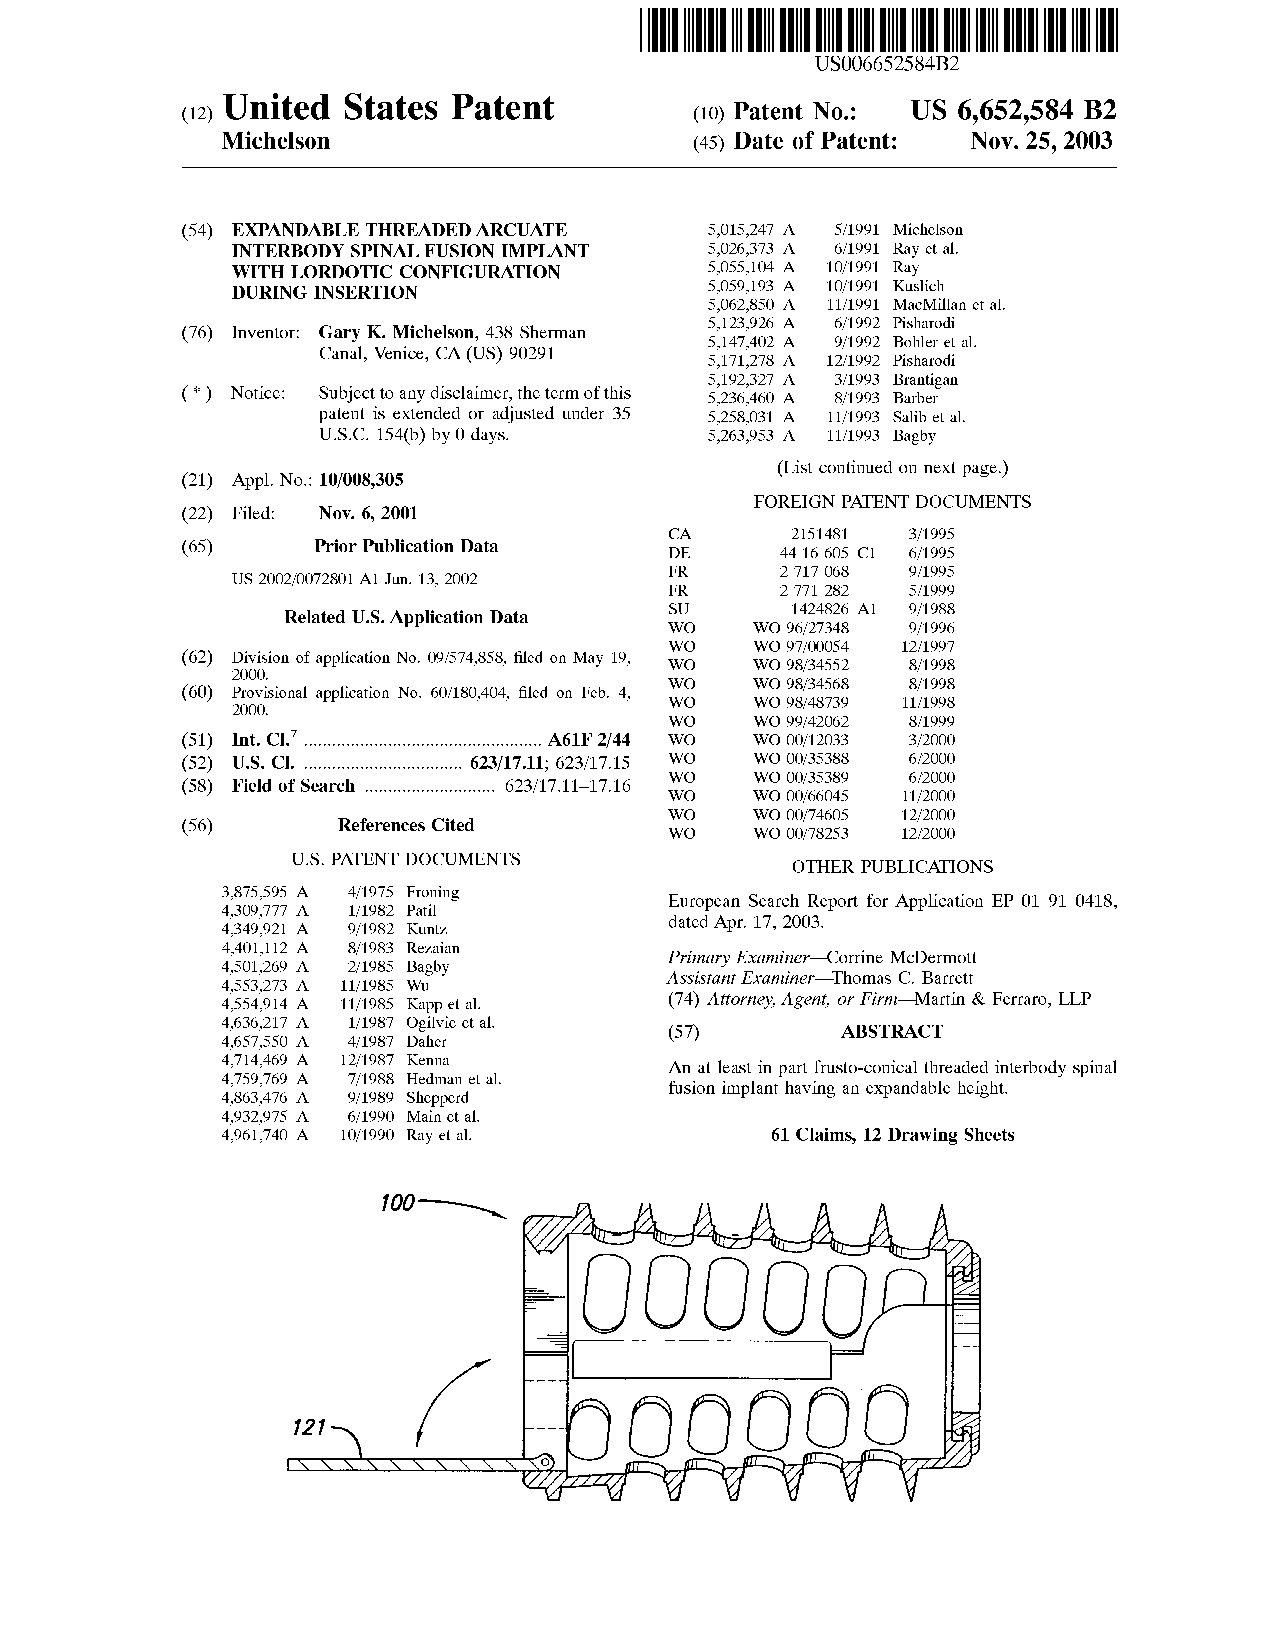 Expandable threaded arcuate interbody spinal fusion implant with lordotic     configuration during insertion - Patent 6,652,584